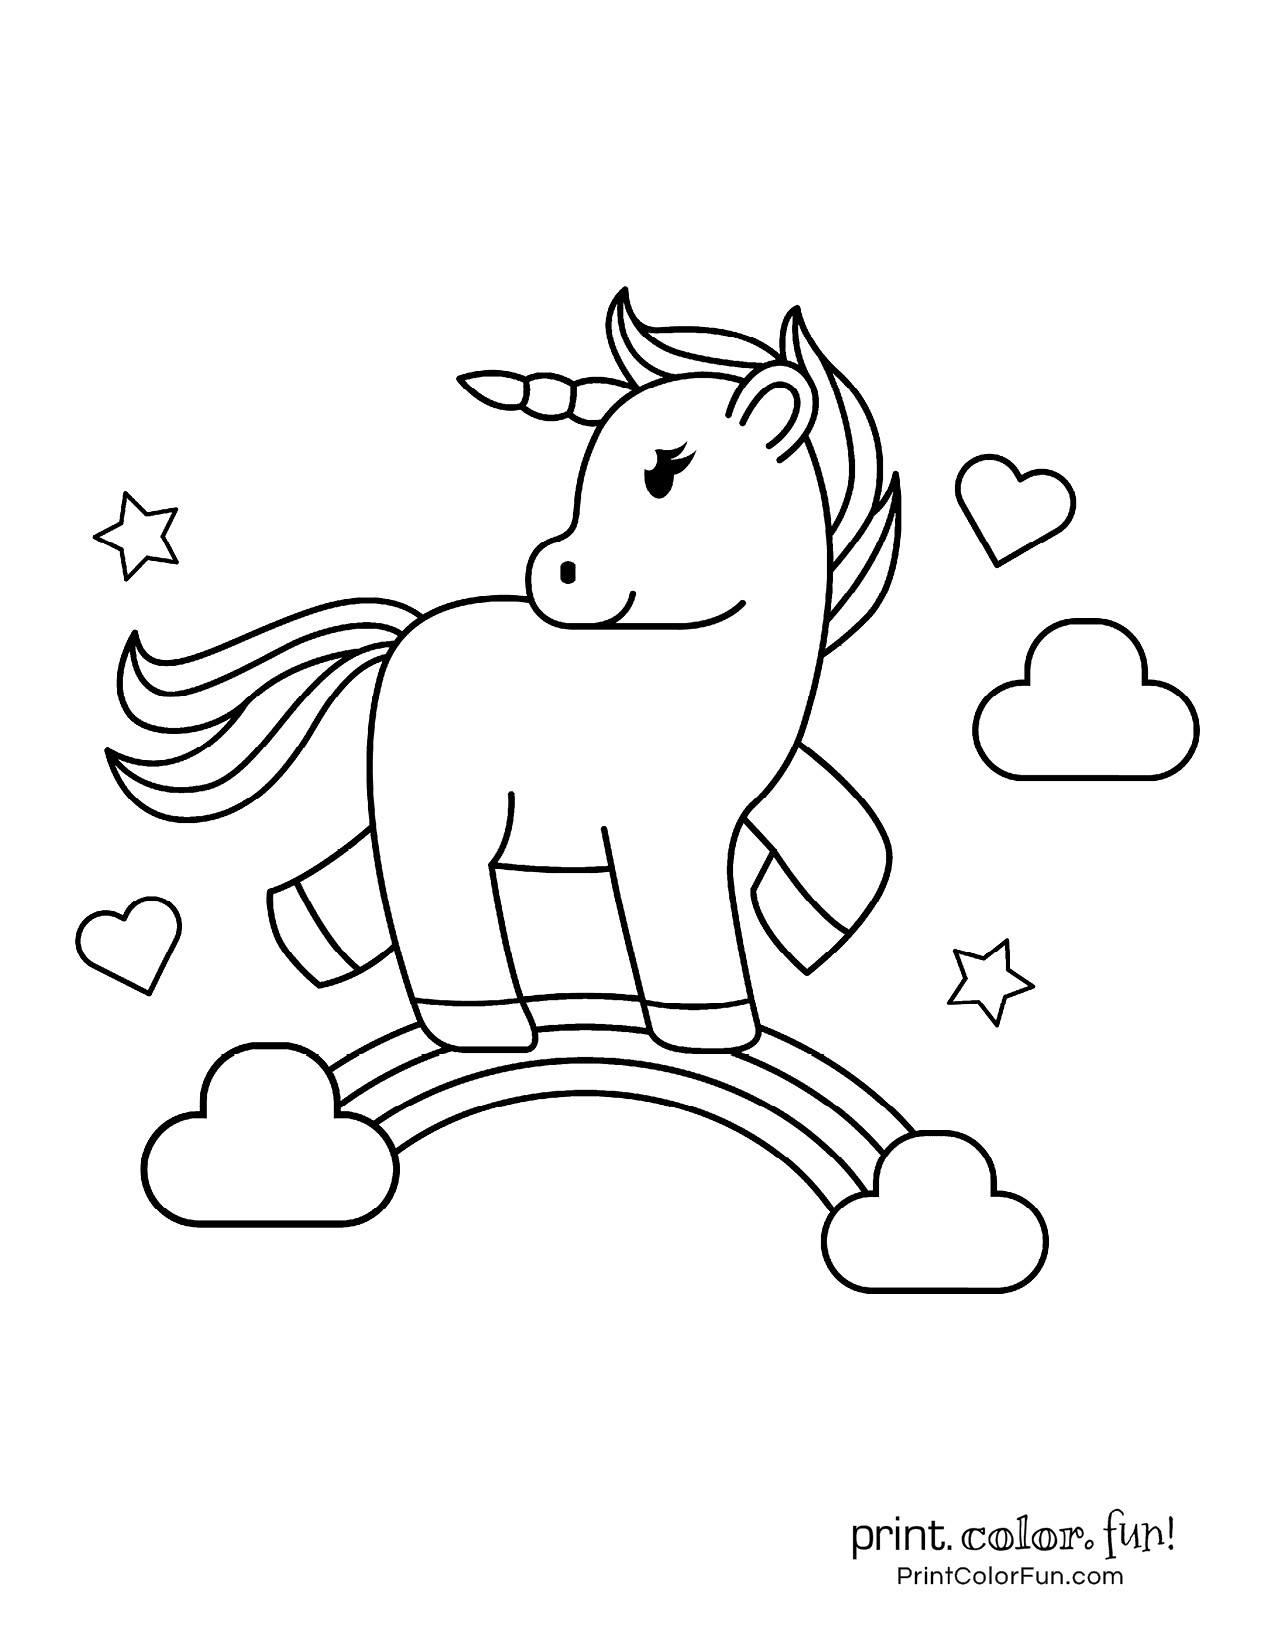 Printable Coloring Pages Of Unicorns
 FREE BABY BINGO TEMPLATE PRINTABLE BLANK Auto Electrical